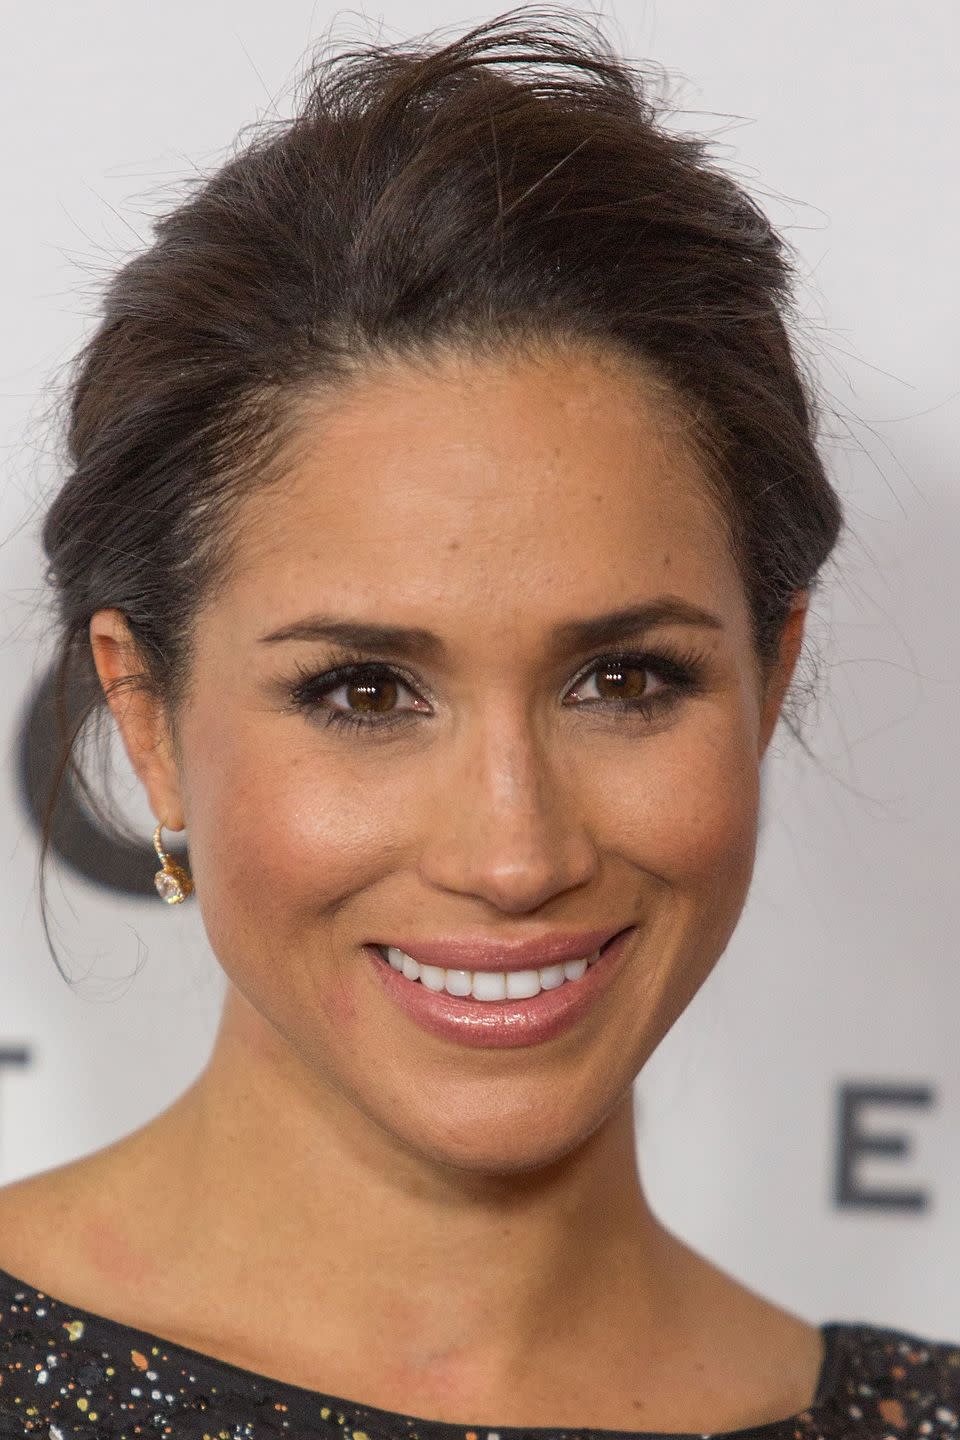 Meghan with an undone updo in 2013